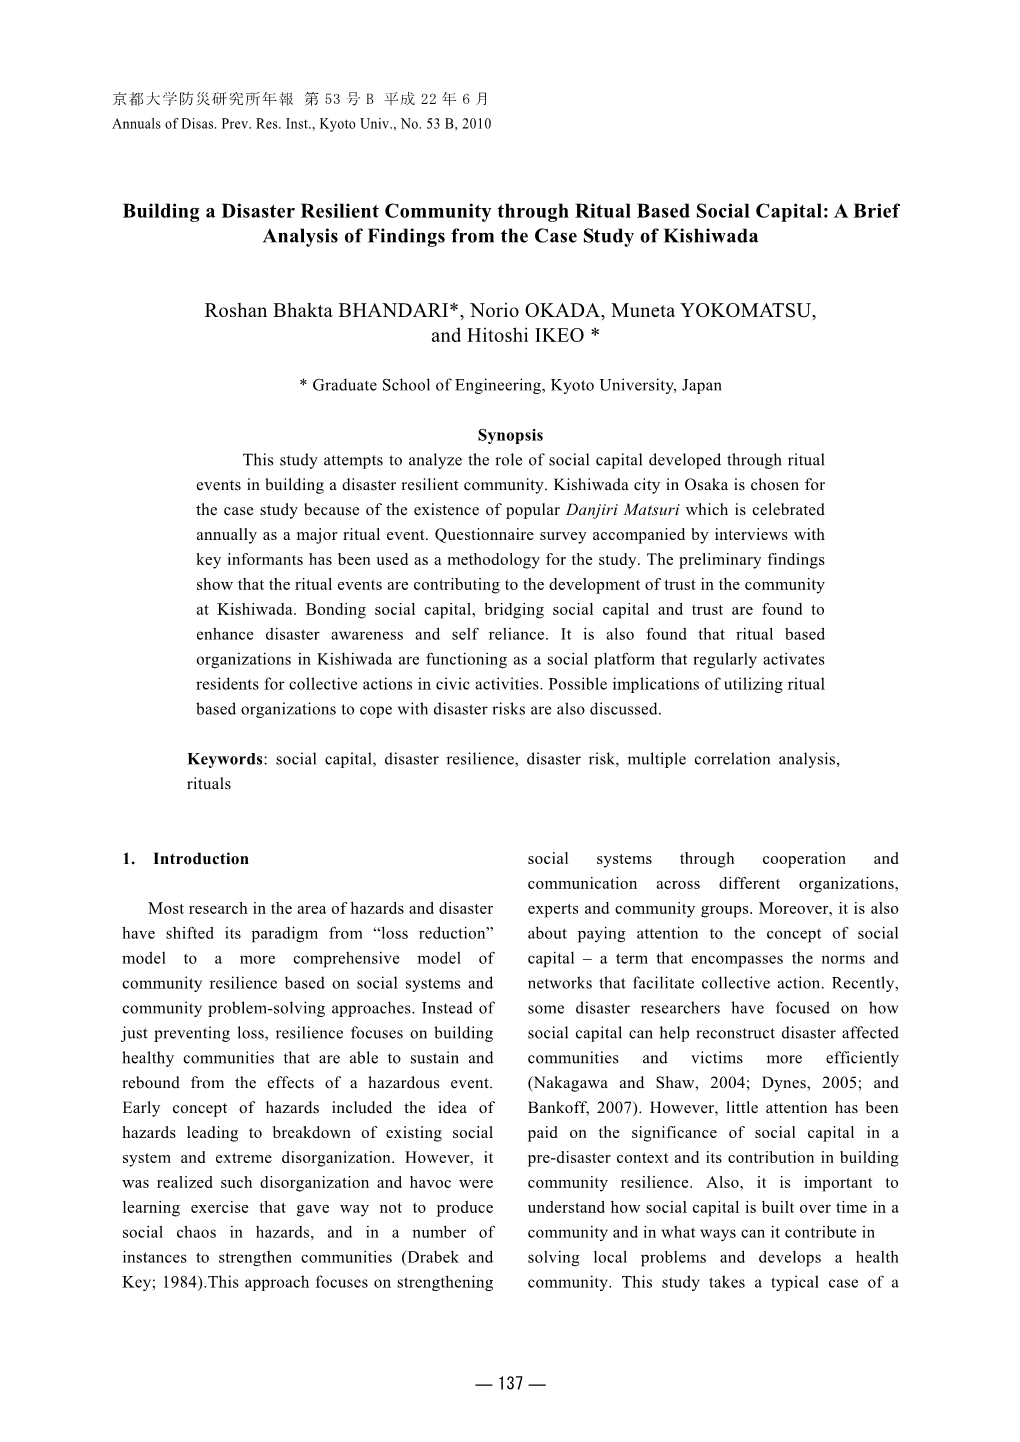 Building a Disaster Resilient Community Through Ritual Based Social Capital: a Brief Analysis of Findings from the Case Study of Kishiwada